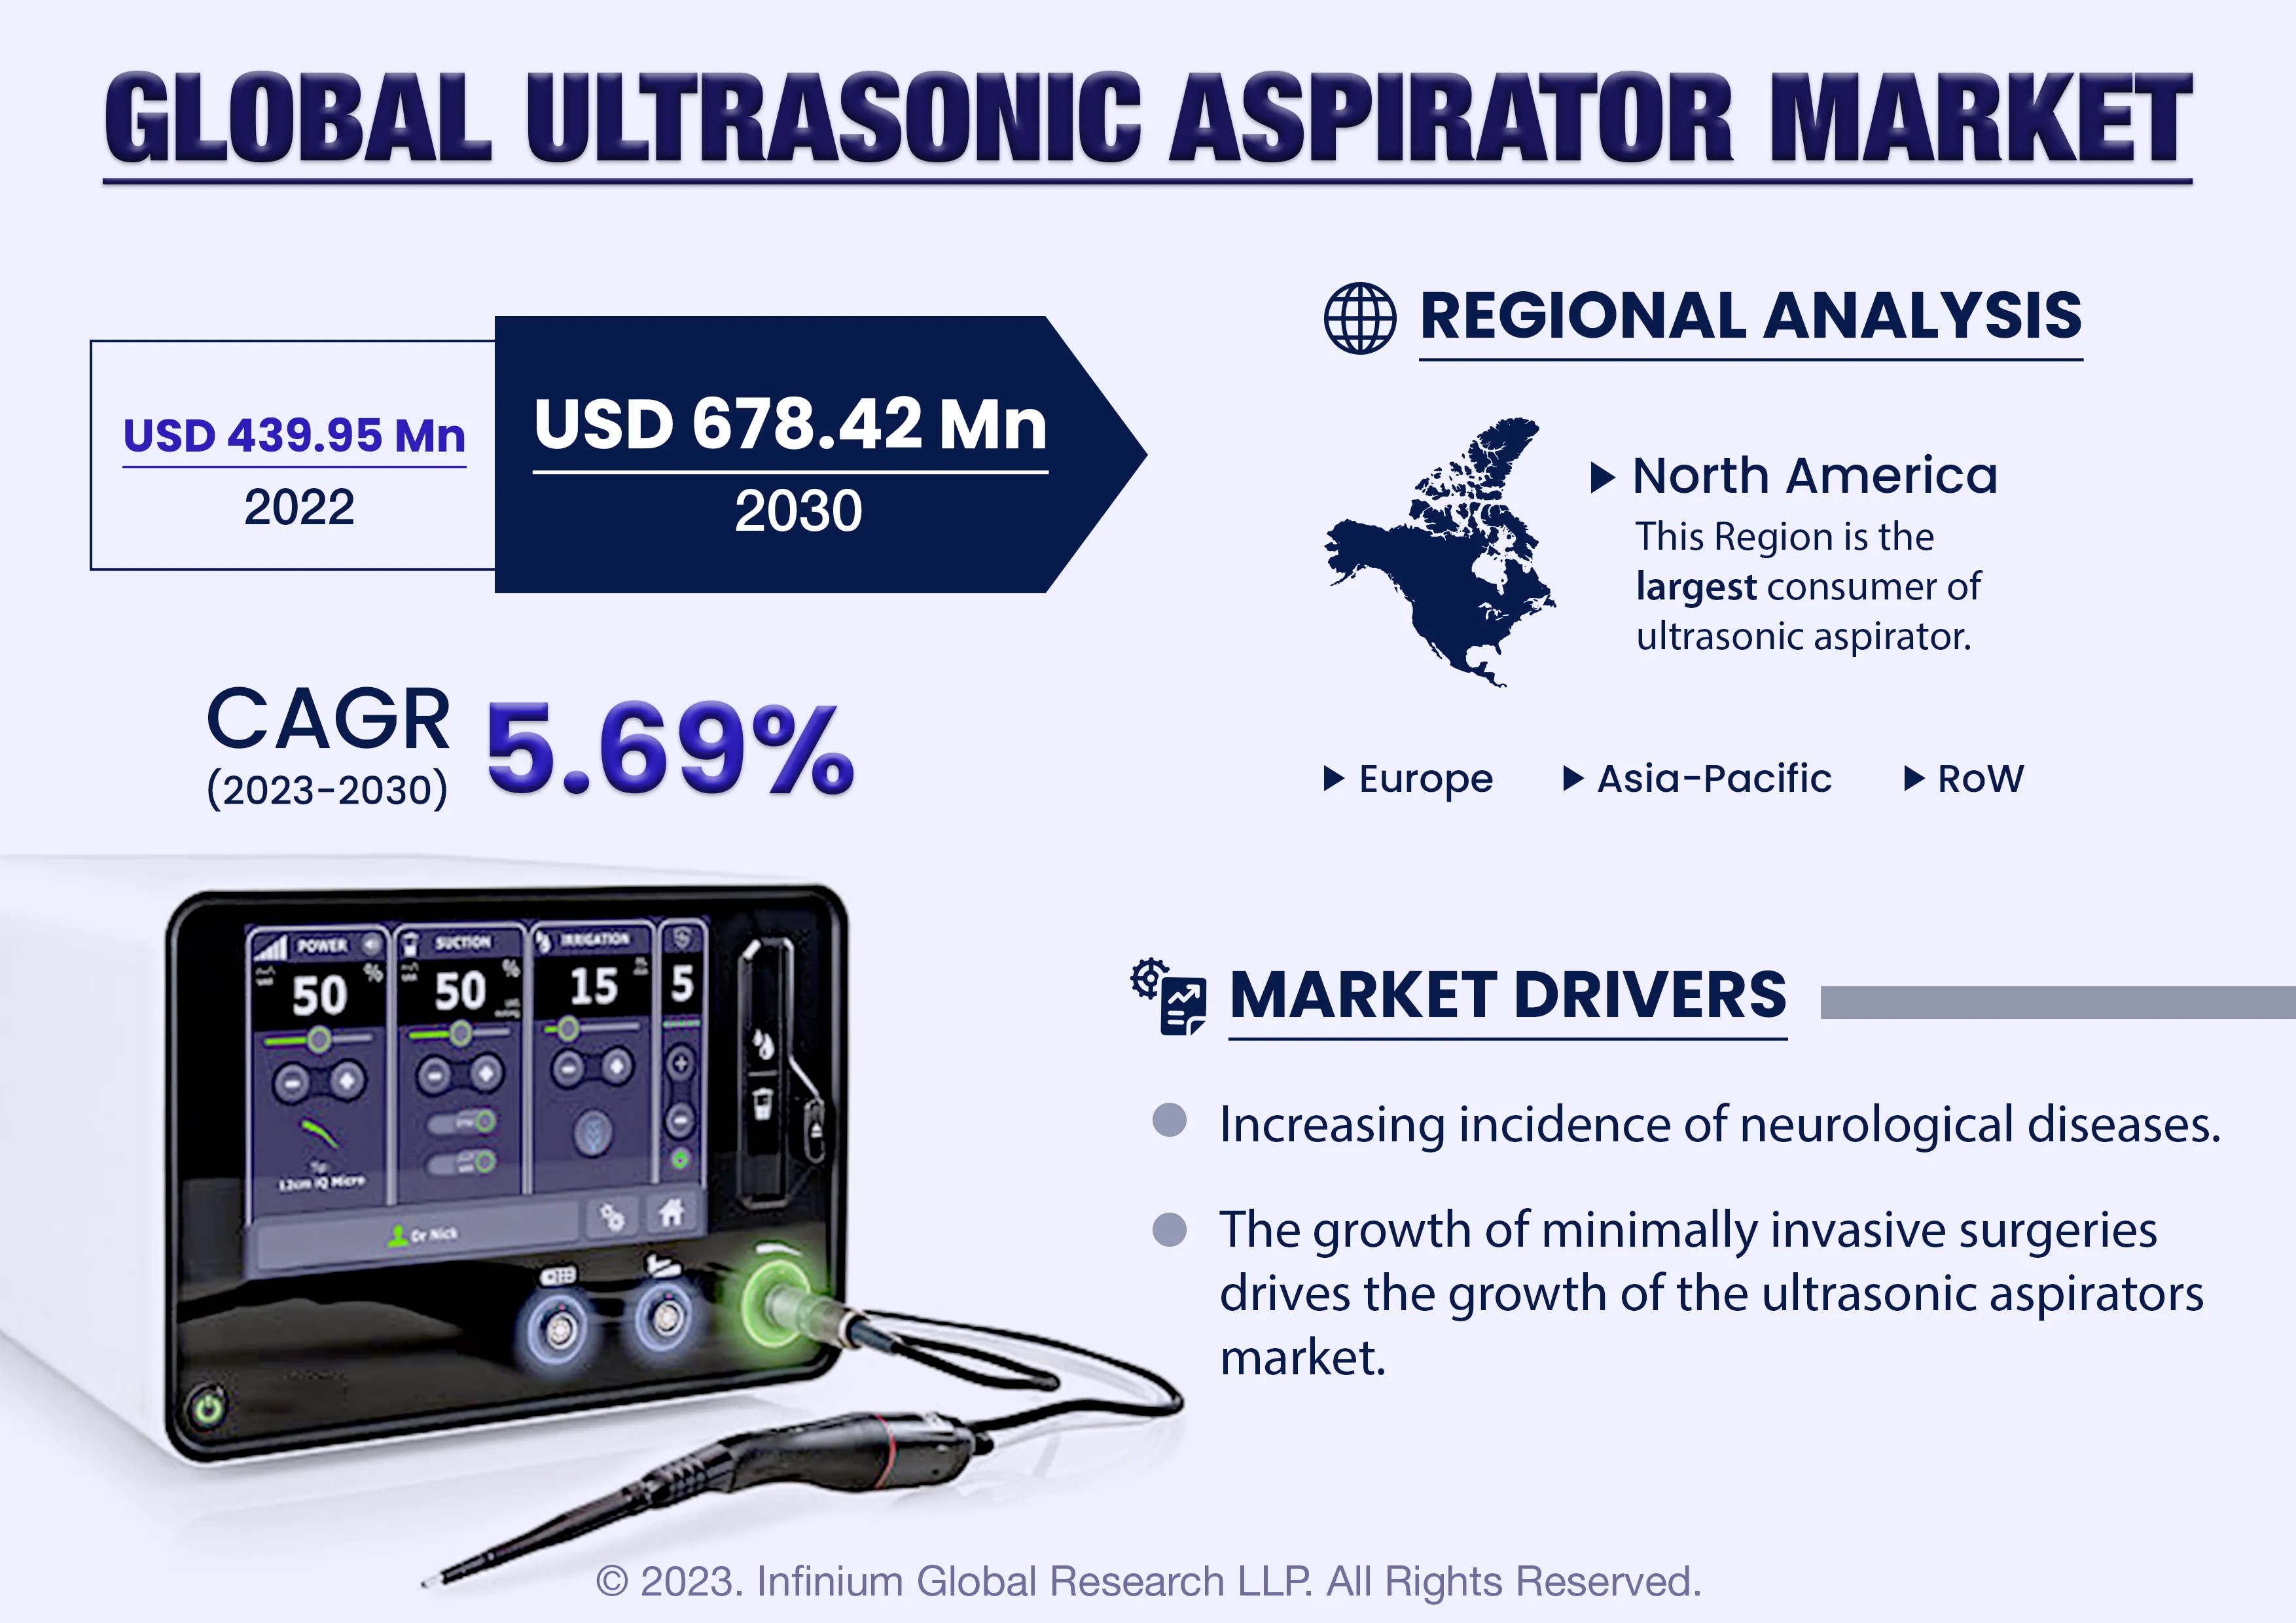 Global Ultrasonic Aspirator Market was Valued at USD 439.95 Million in 2022 and is Expected to Reach USD 678.42 Million by 2030 and Grow at a CAGR of 5.69% Over the Forecast Period.